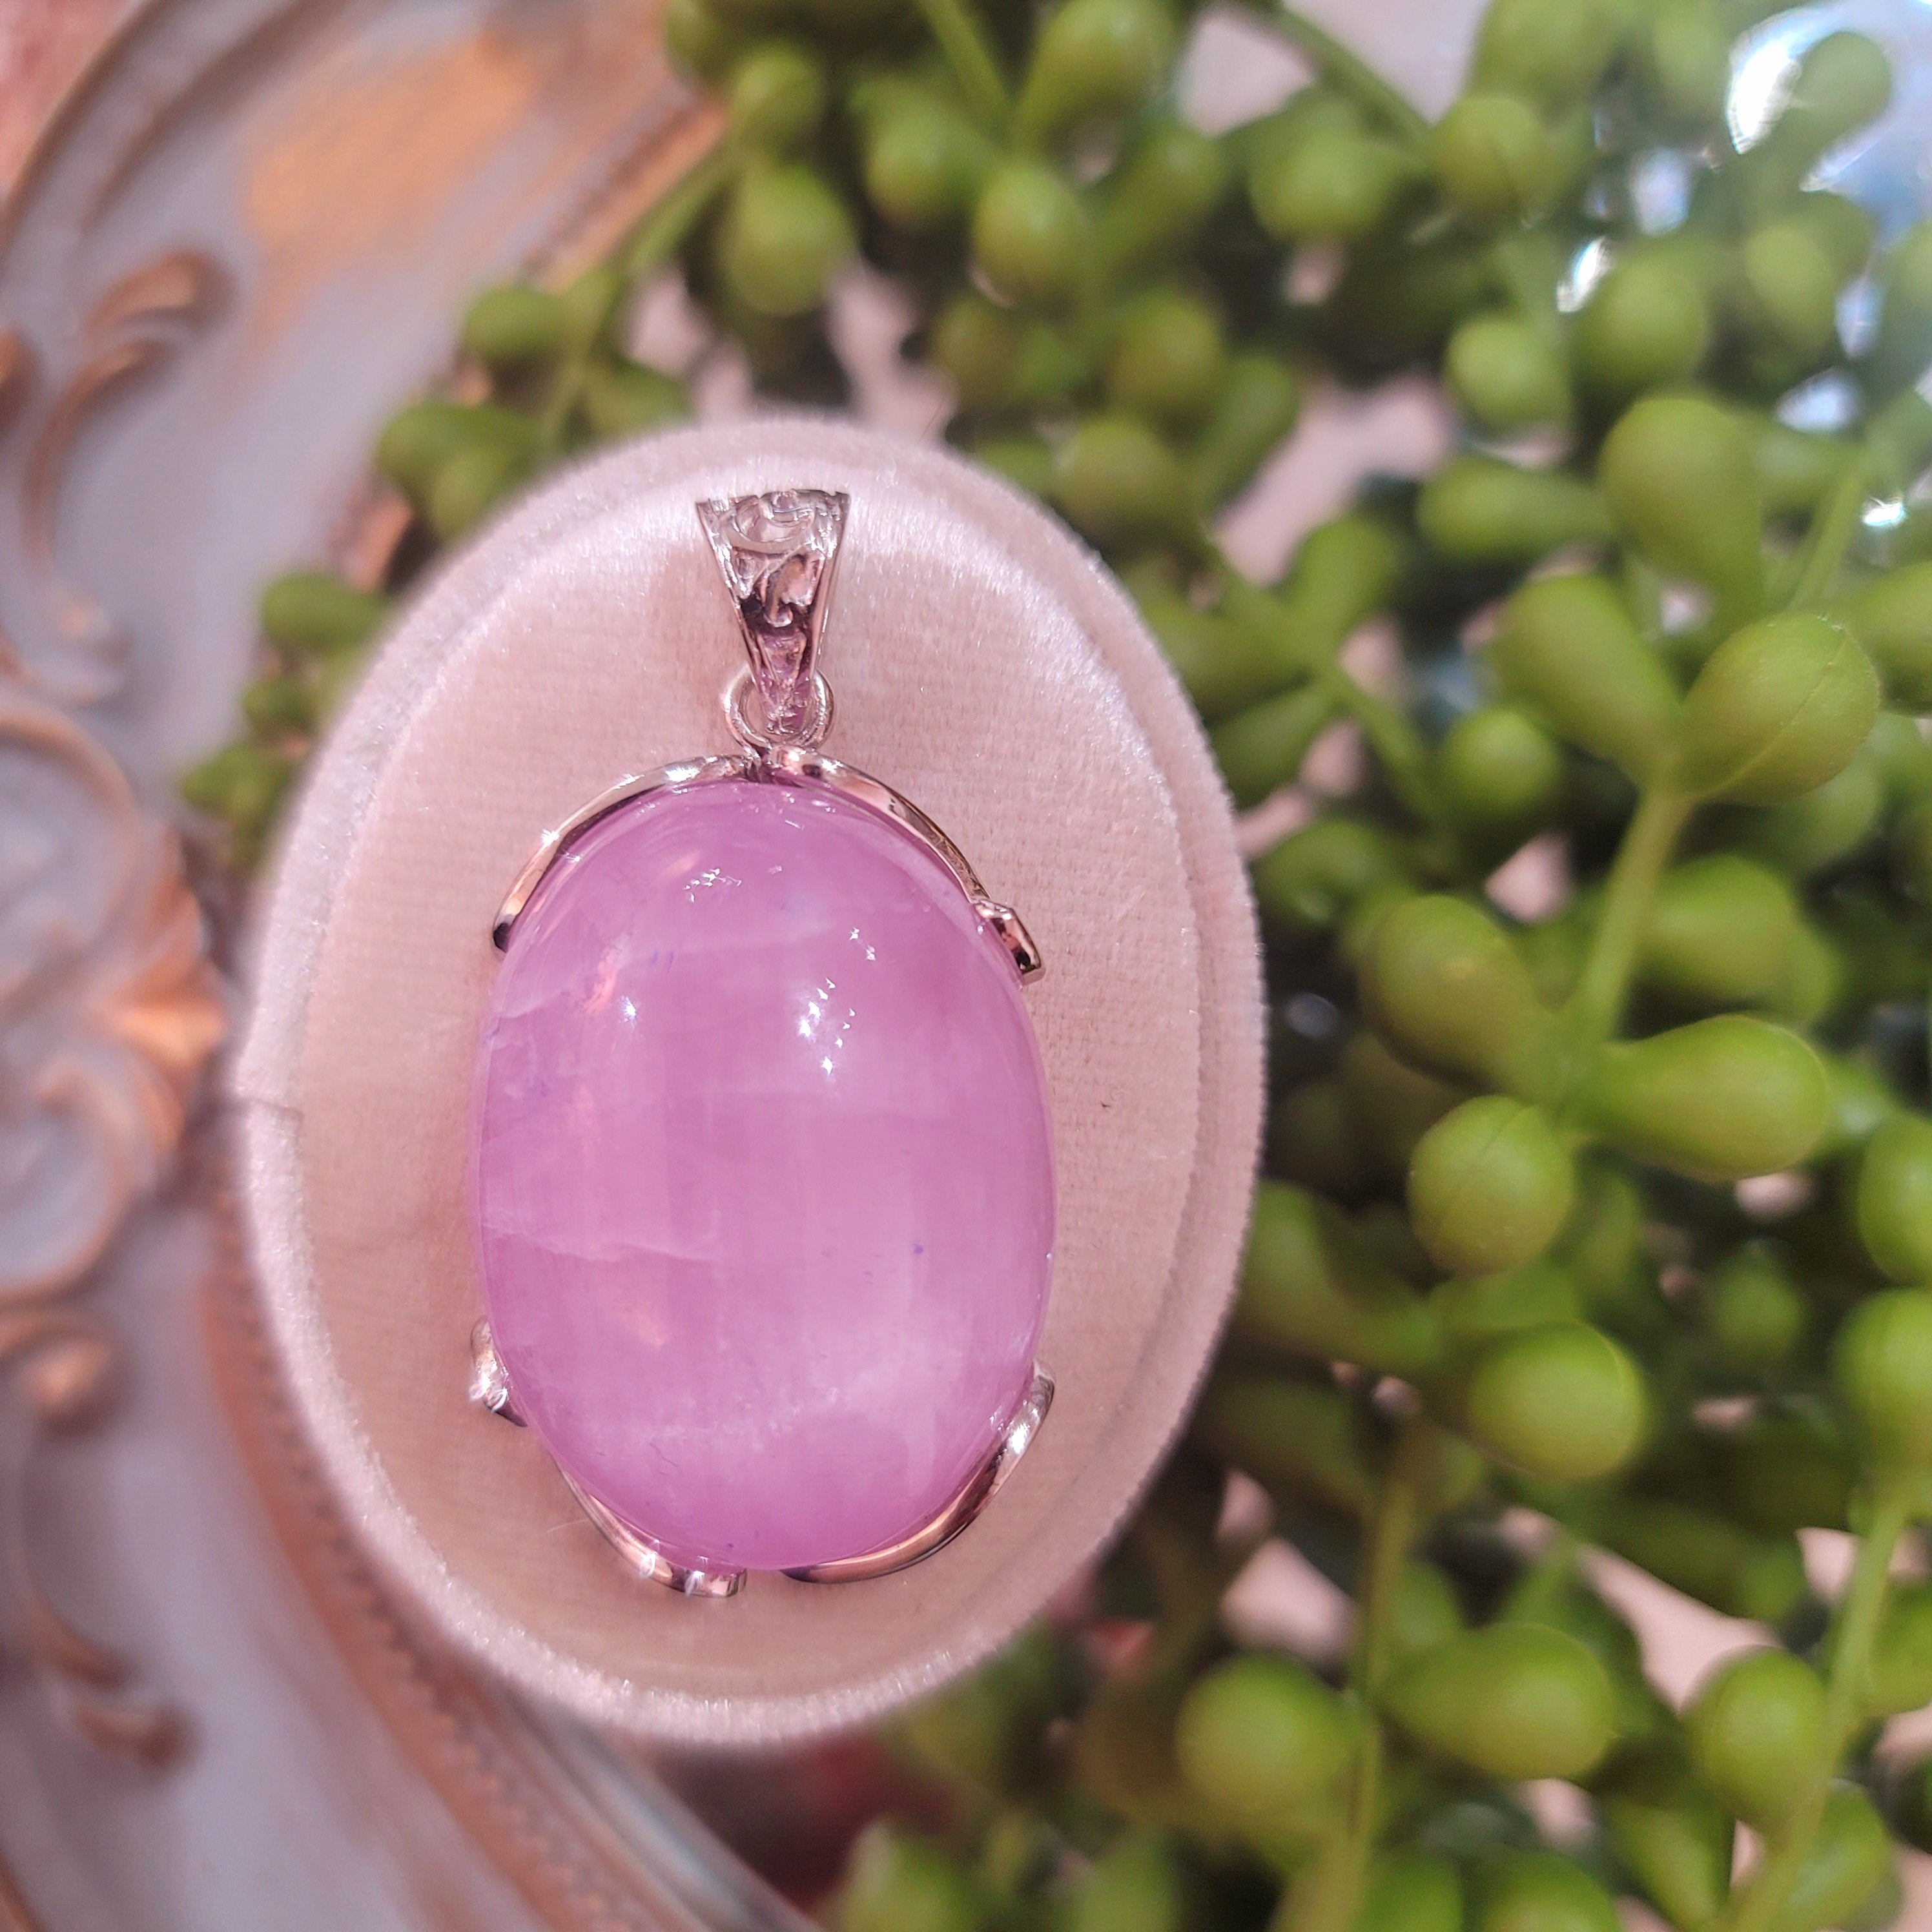 Kunzite Pendant (AAA Grade) for Emotional, Family Healing and Opening Your Heart to Love